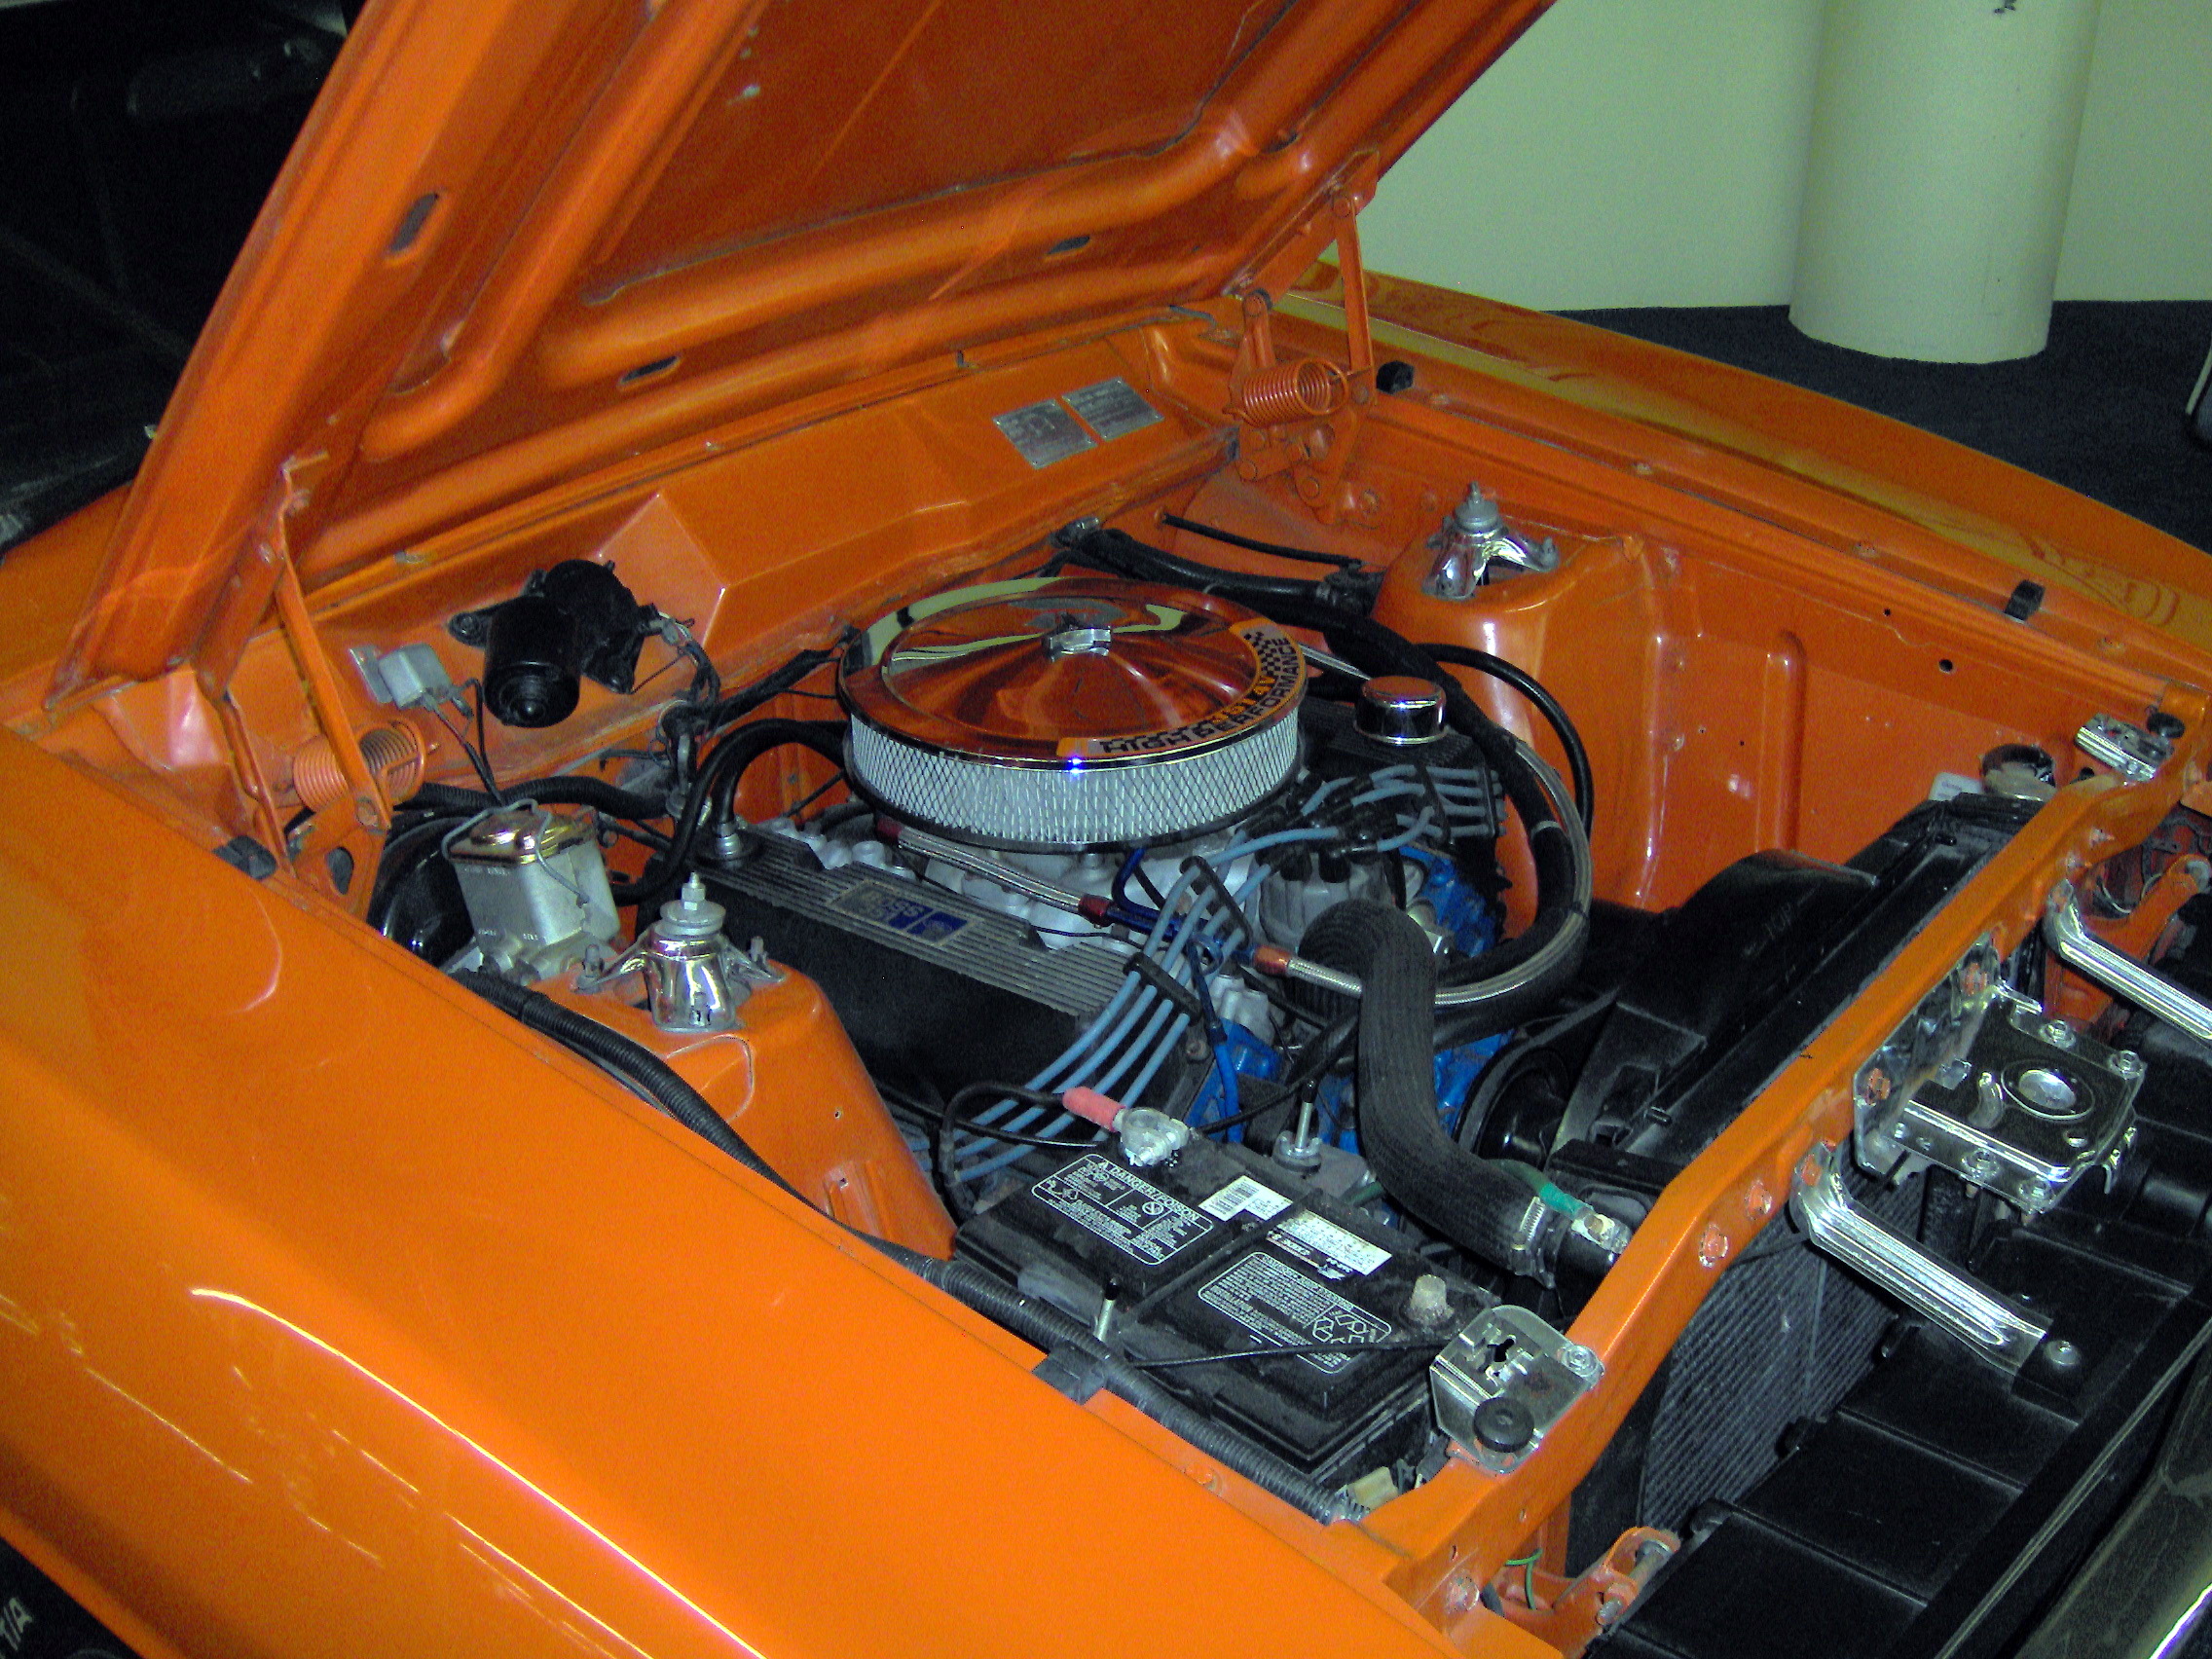 1975 Ford Falcon Coupe engine